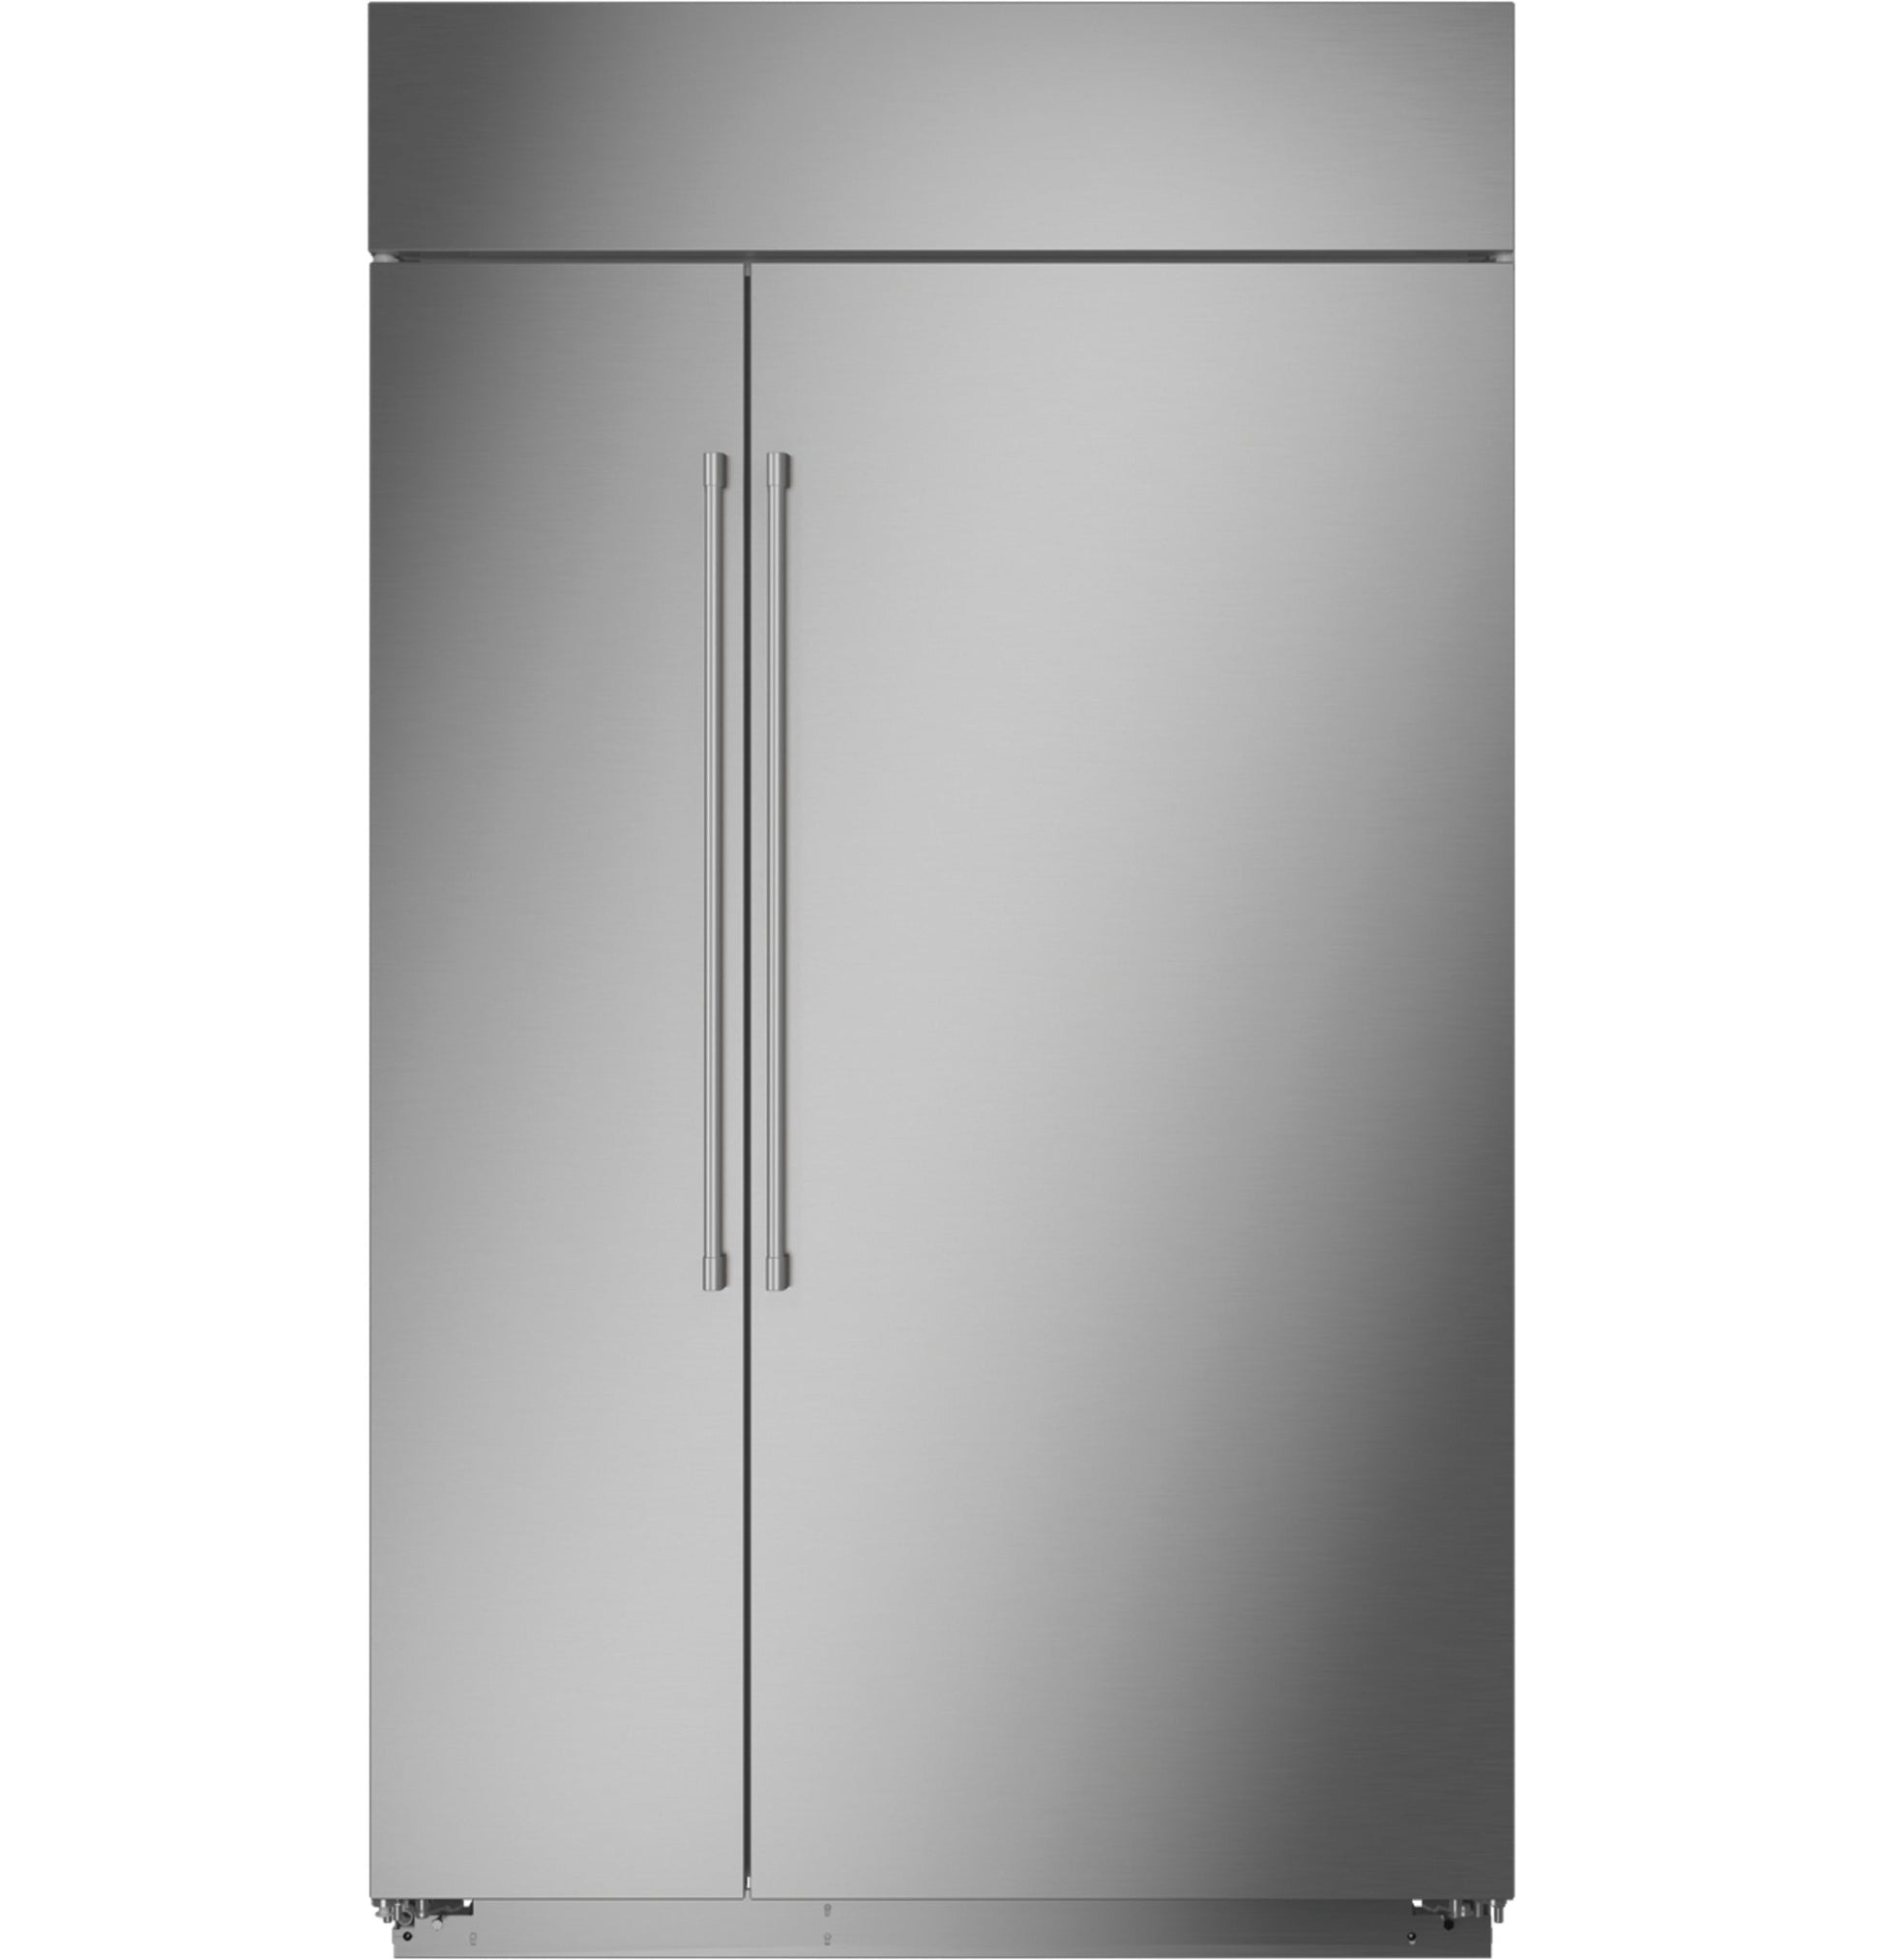 Monogram 48" Built In Side By Side Stainless Steel Refrigerator - ZISS480NNSS